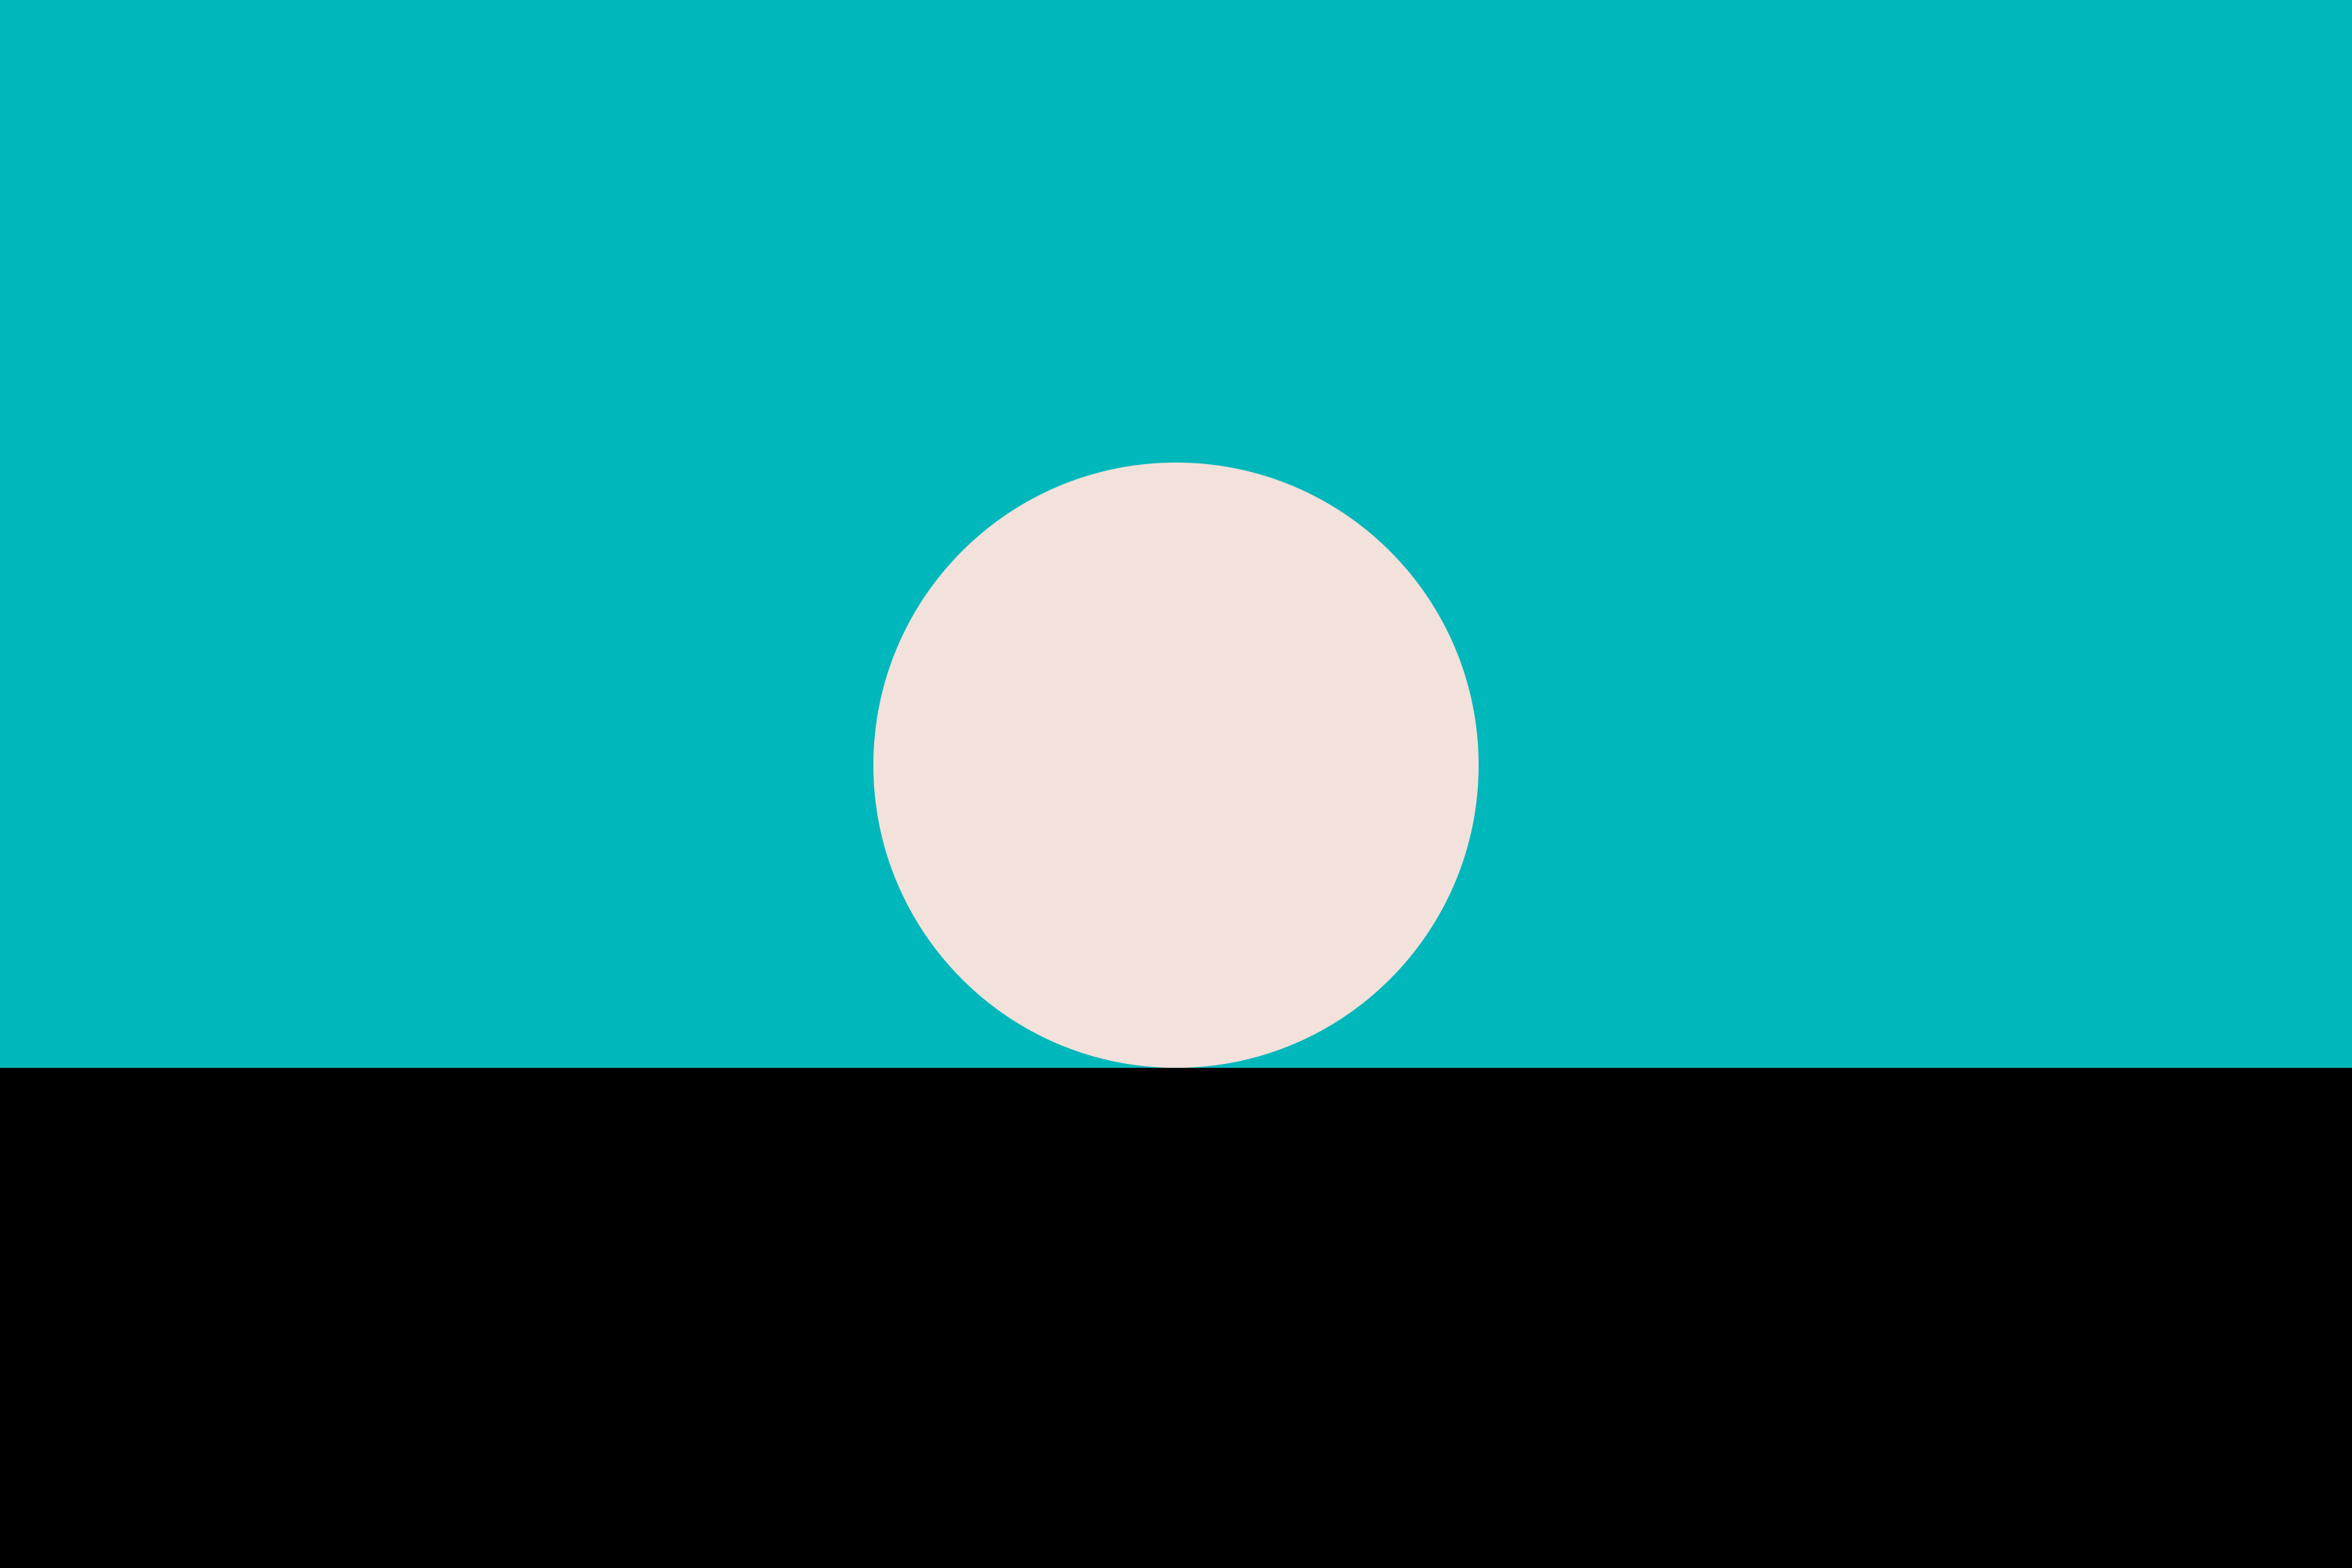 A white circle, seen against a blue background, rolls on a black floor that is tilting back and forth